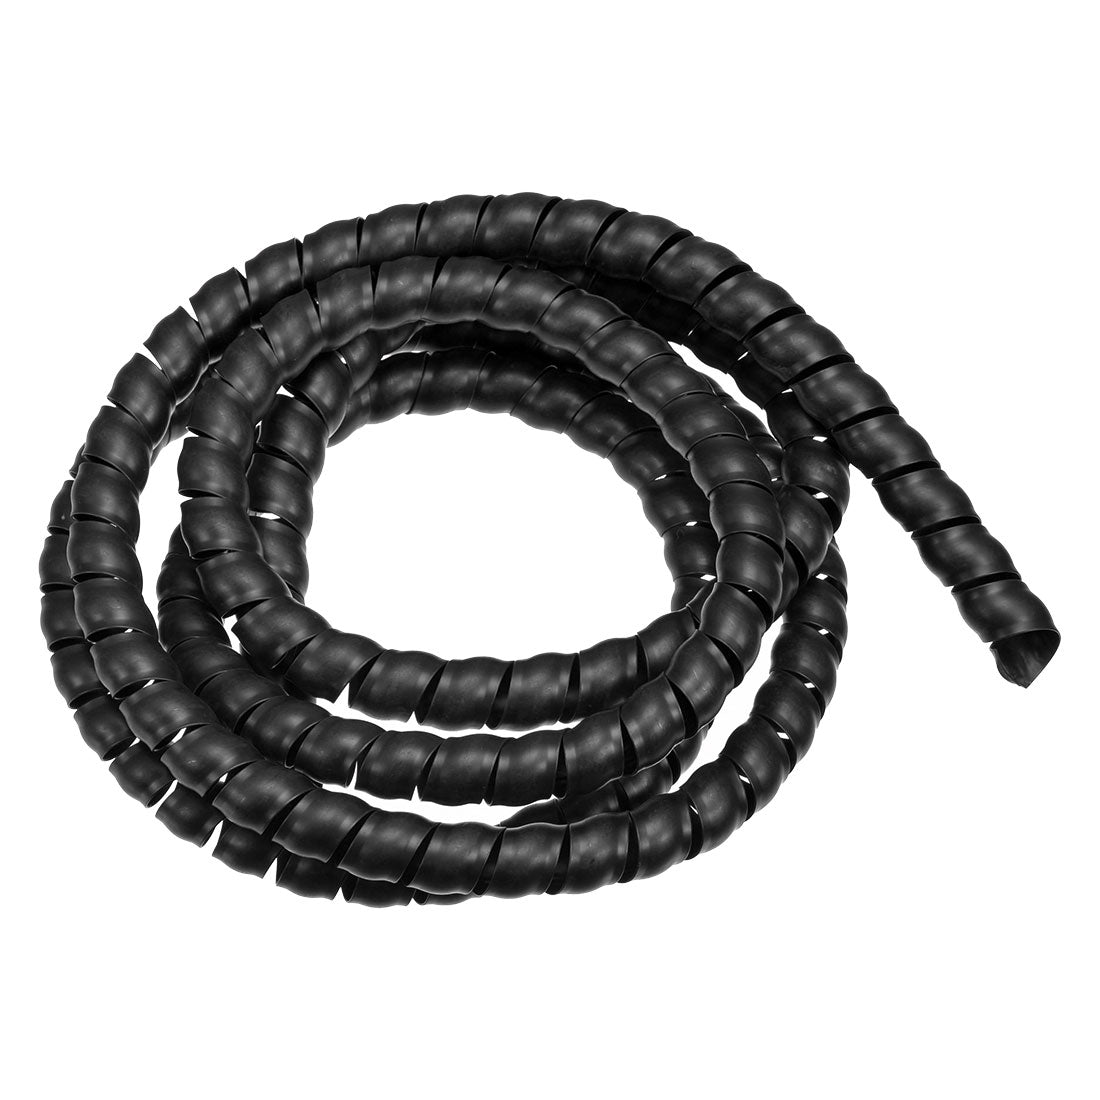 uxcell Uxcell Flexible Spiral Tube Wrap Cable Management Sleeve 16mm x 19mm Computer Wire Manage Cord 2 Meters Length Black